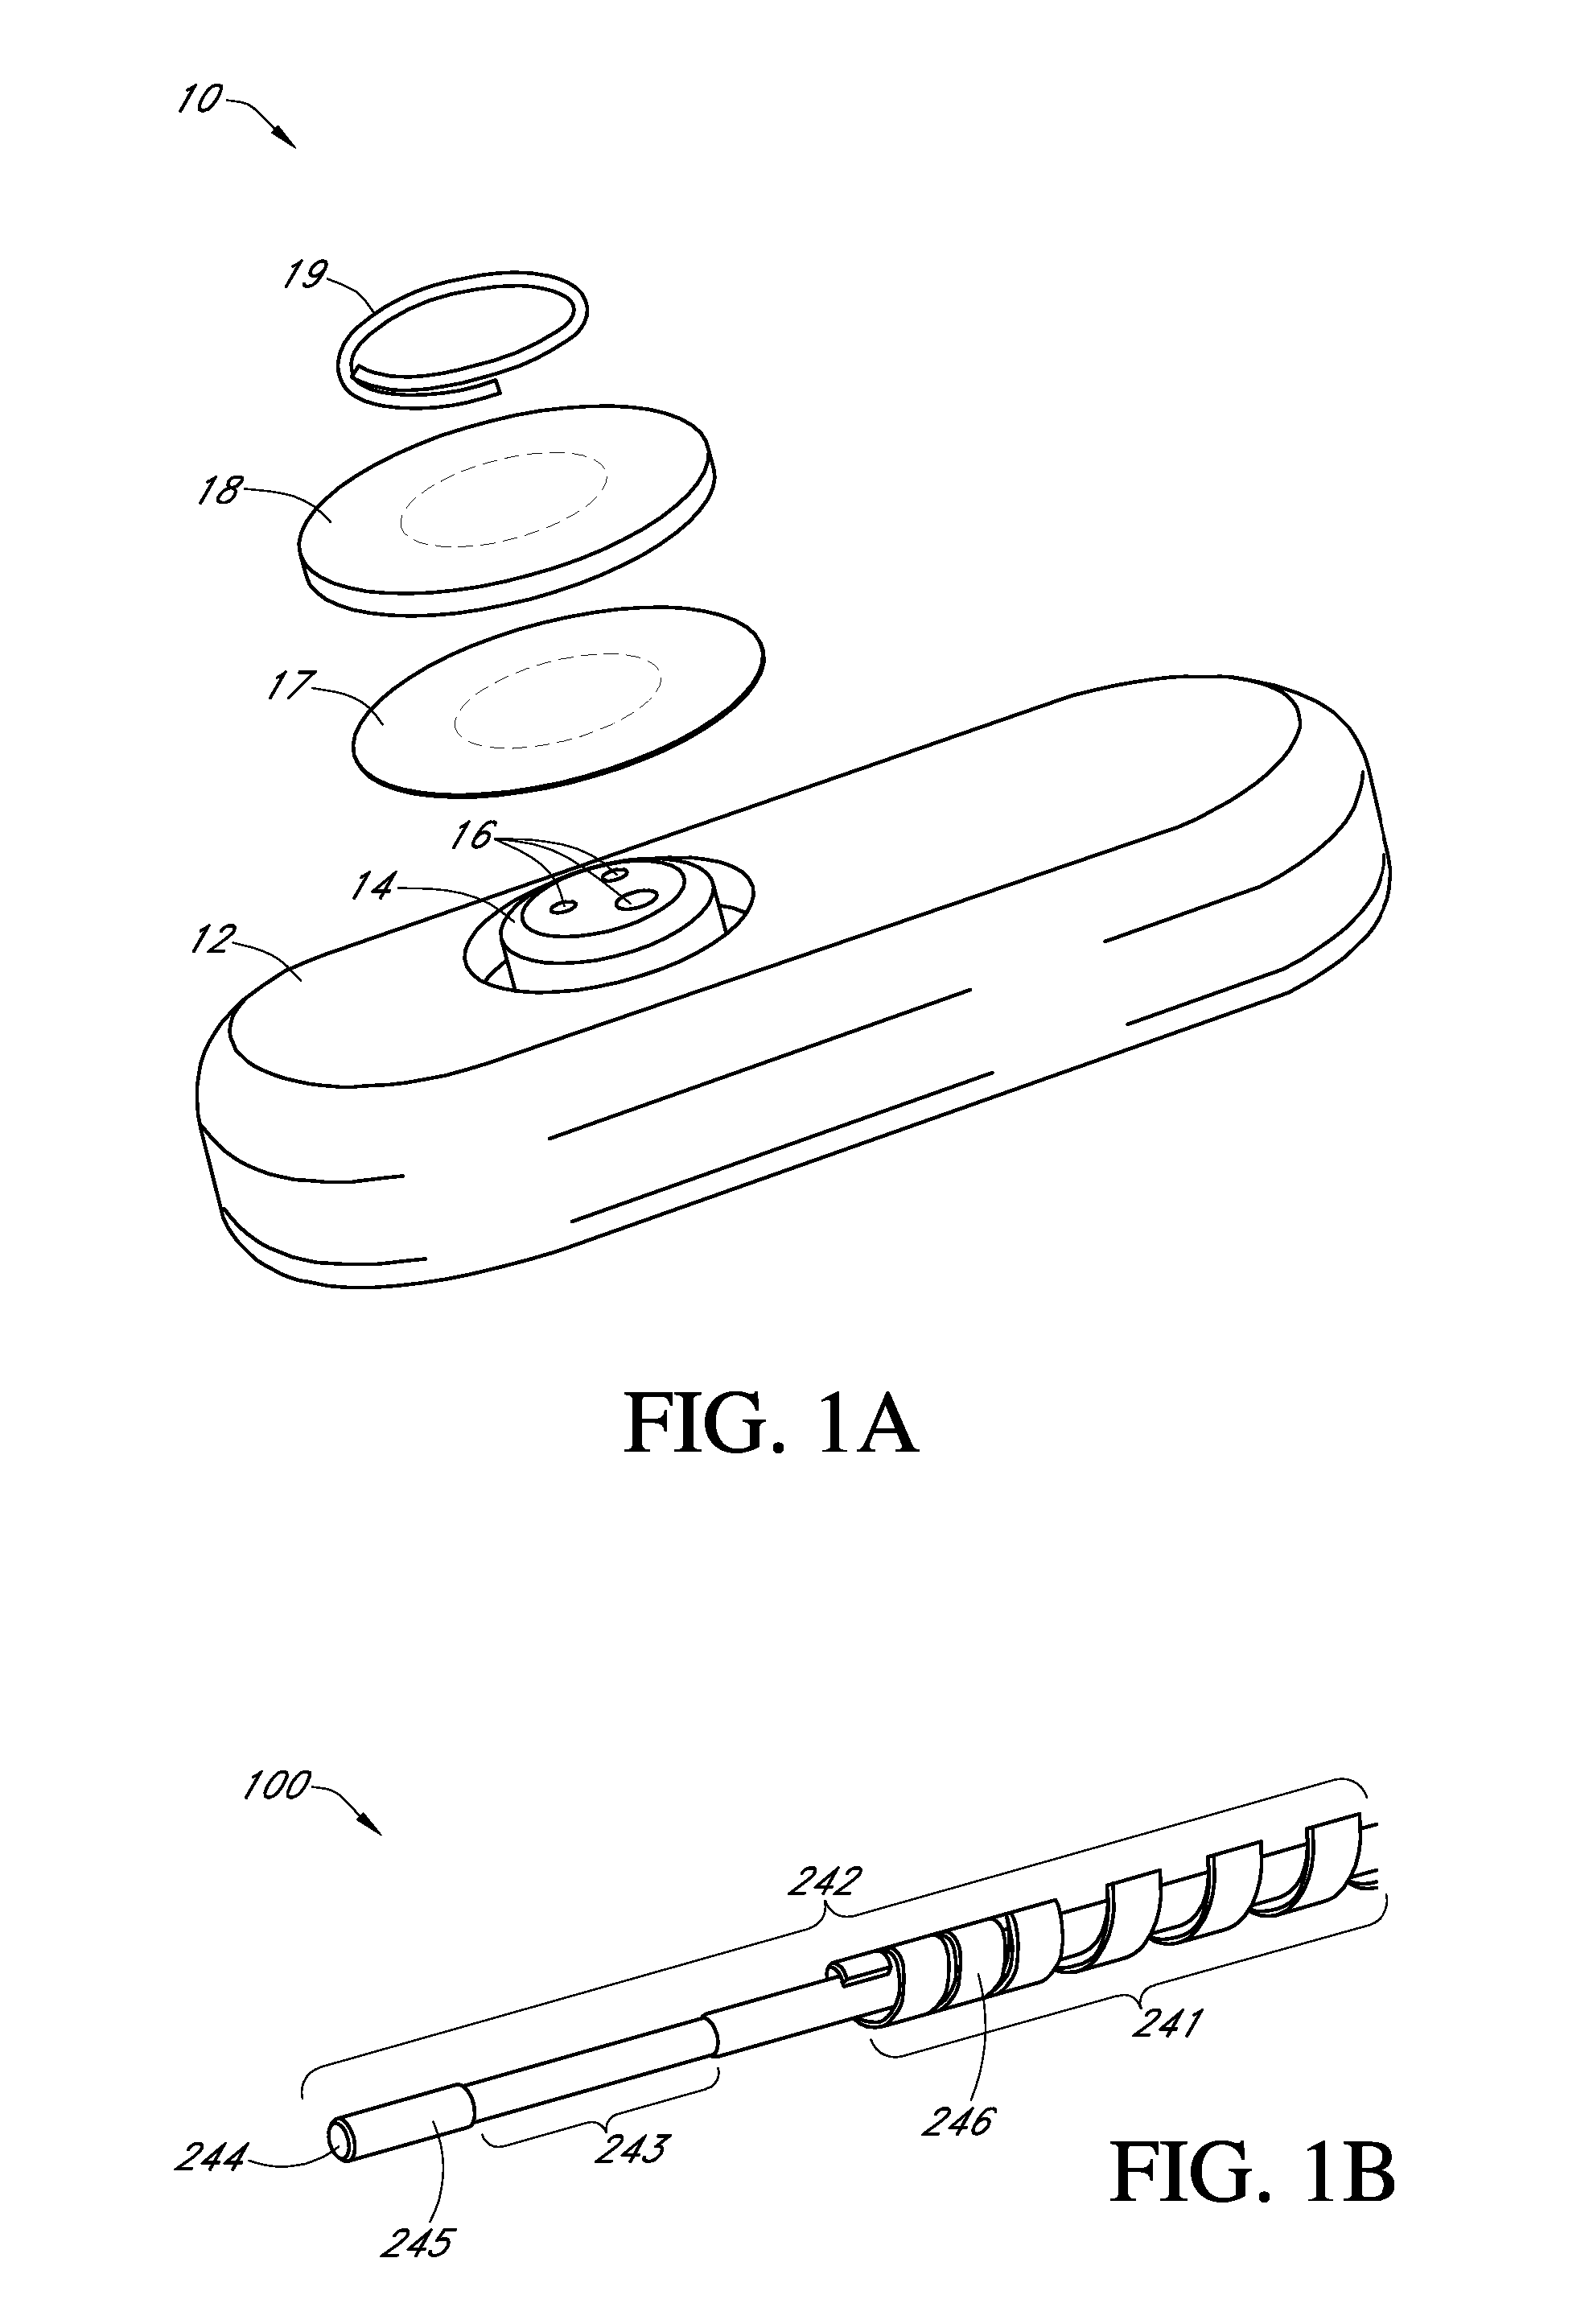 Systems and methods for replacing signal data artifacts in a glucose sensor data stream